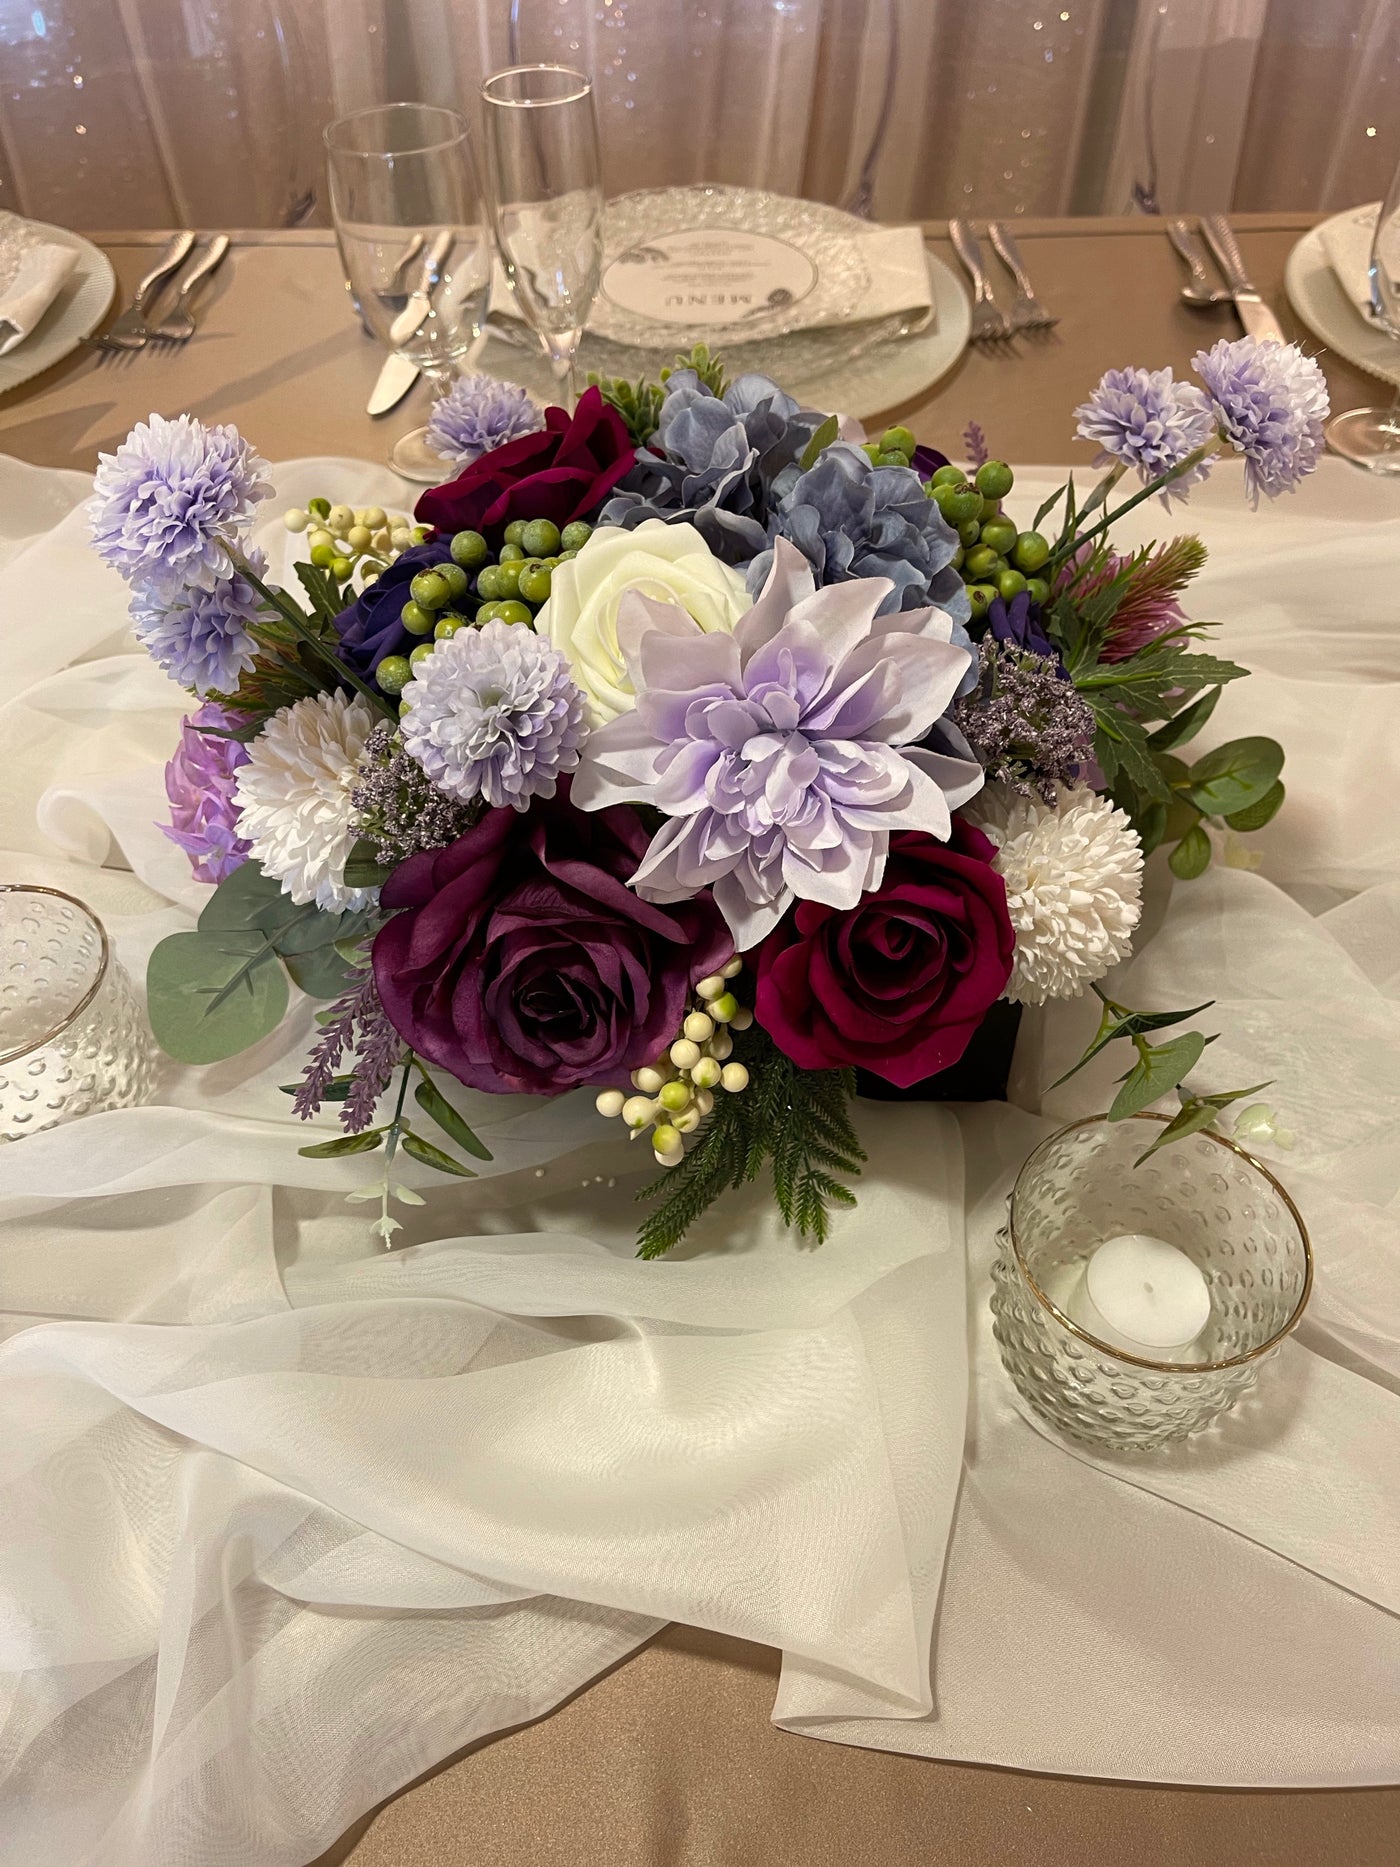 Rent a Rose- Centrepiece- Purple, Lavender, Fuchsia and white flowers-  Rent for five days for $20.00